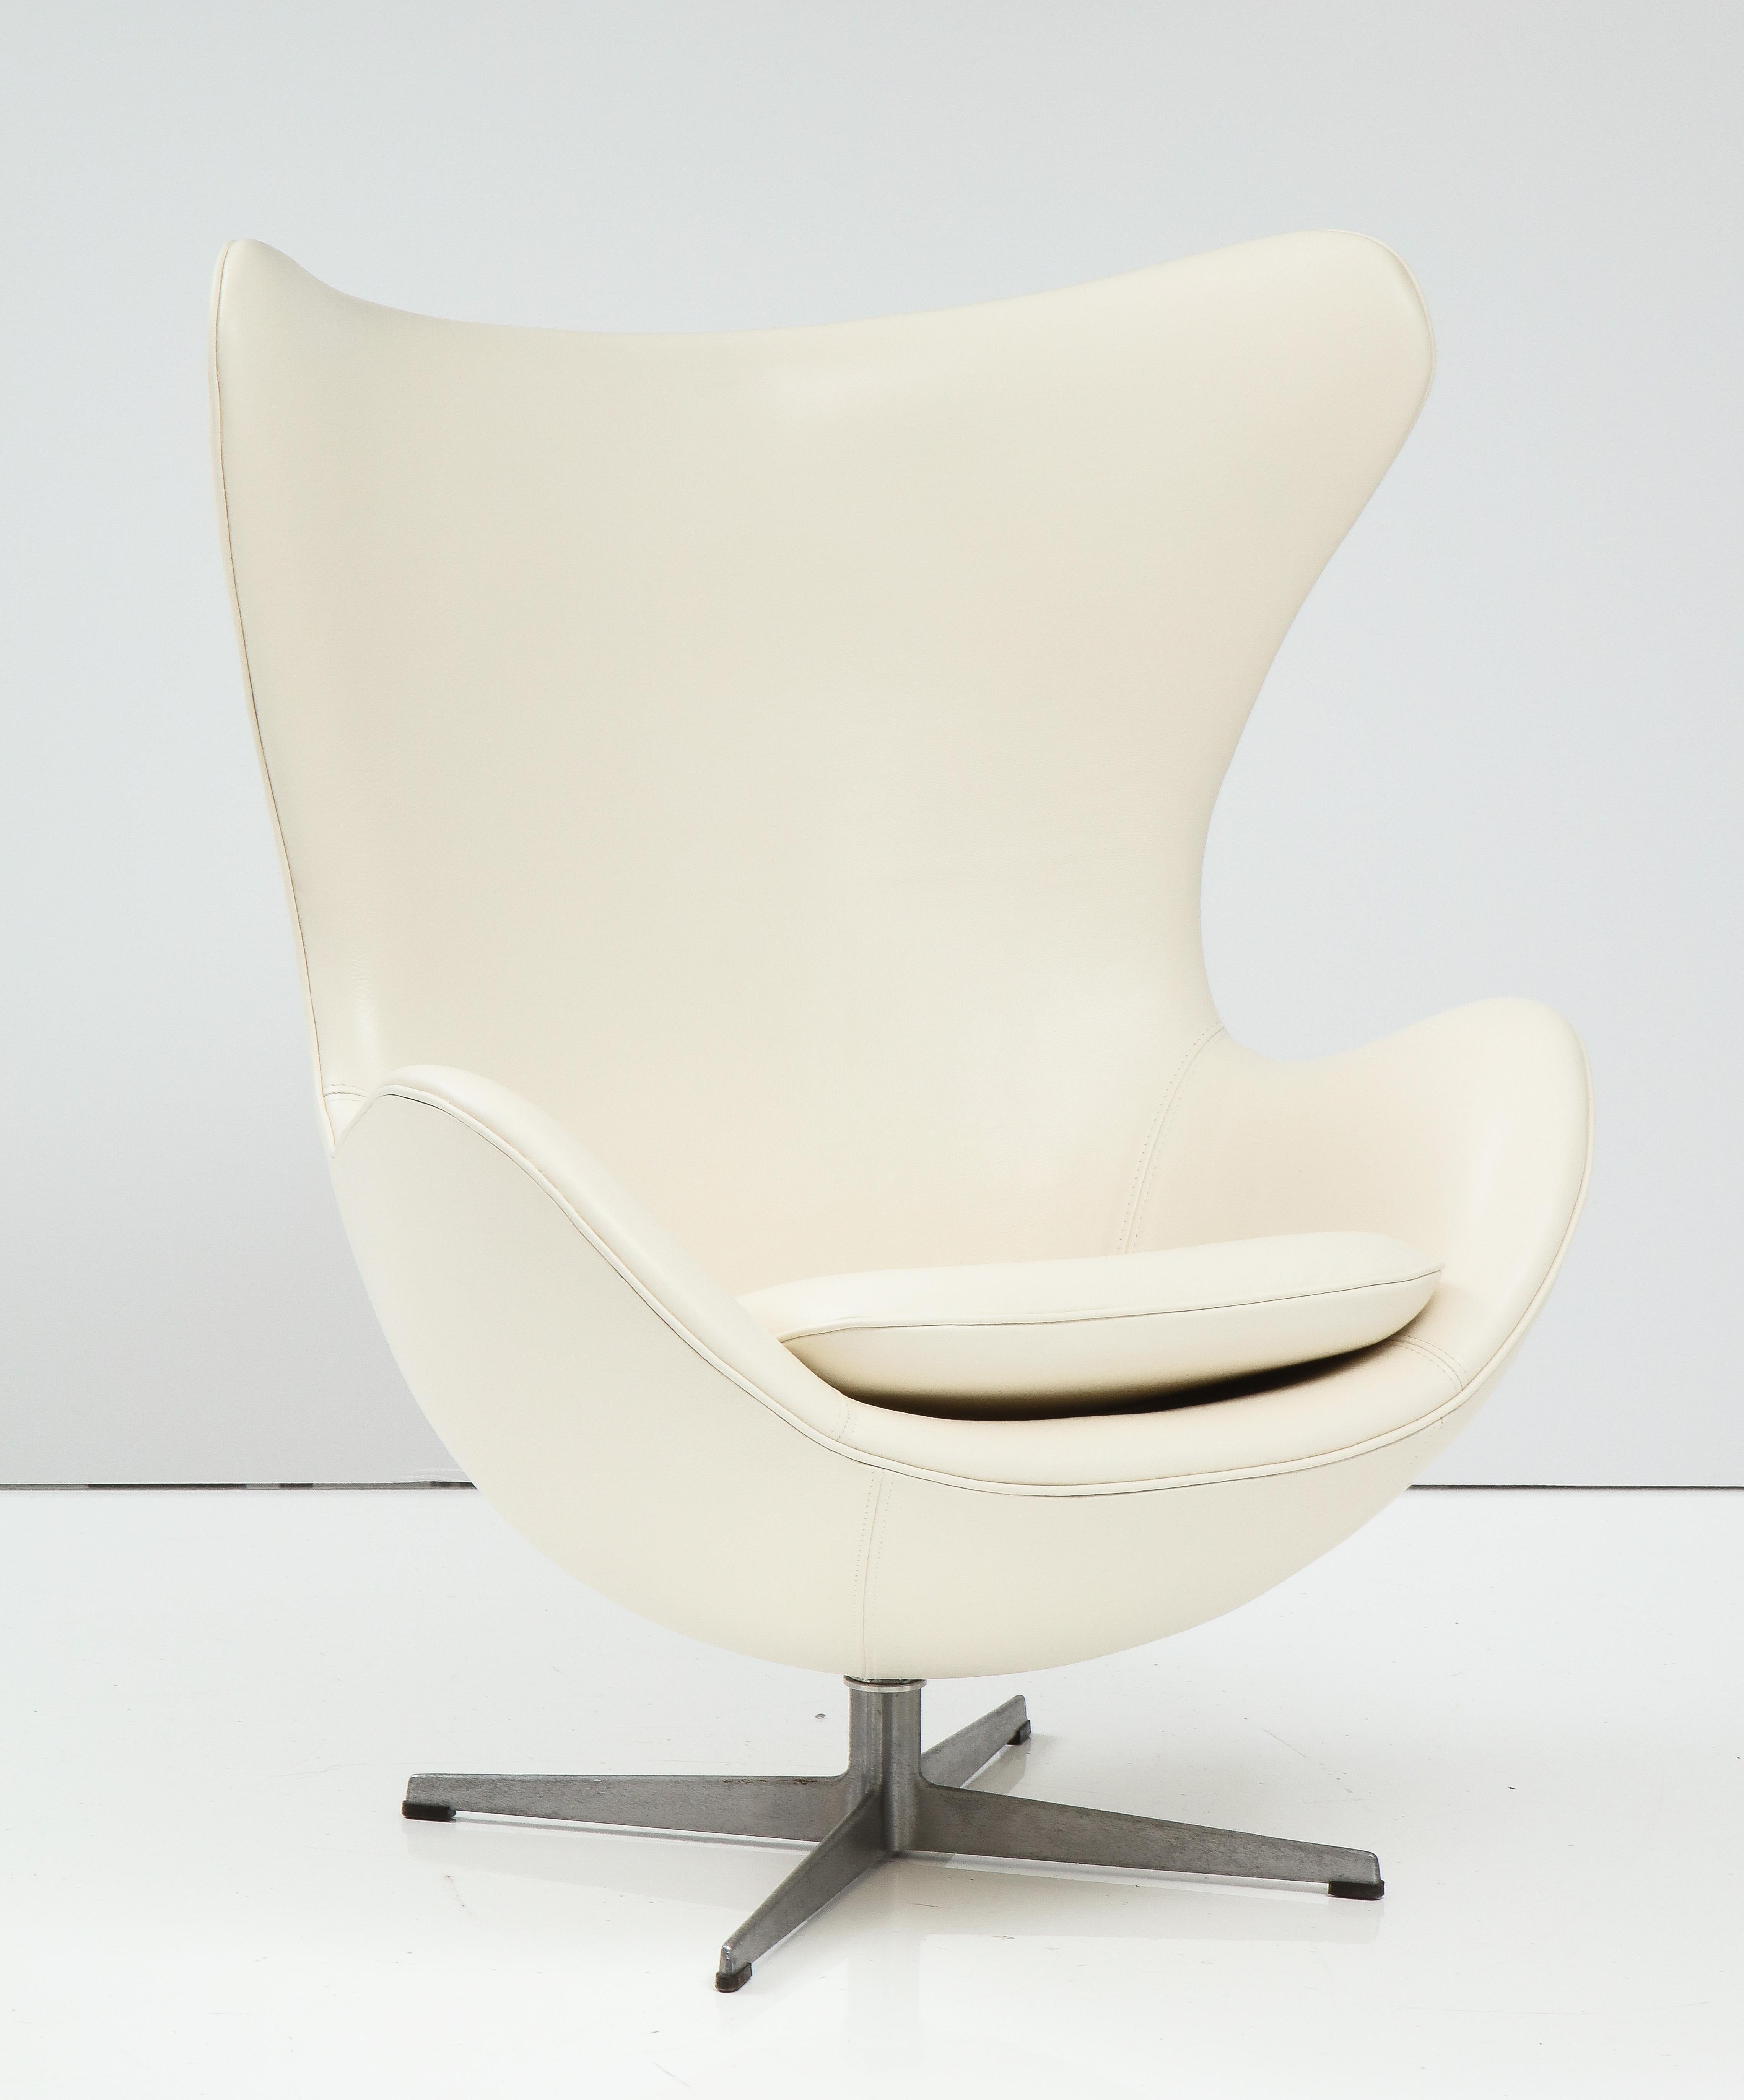 Mid-20th Century Arne Jacobson Vintage 'Egg' Chair in White Leather for Fritz Hansen For Sale